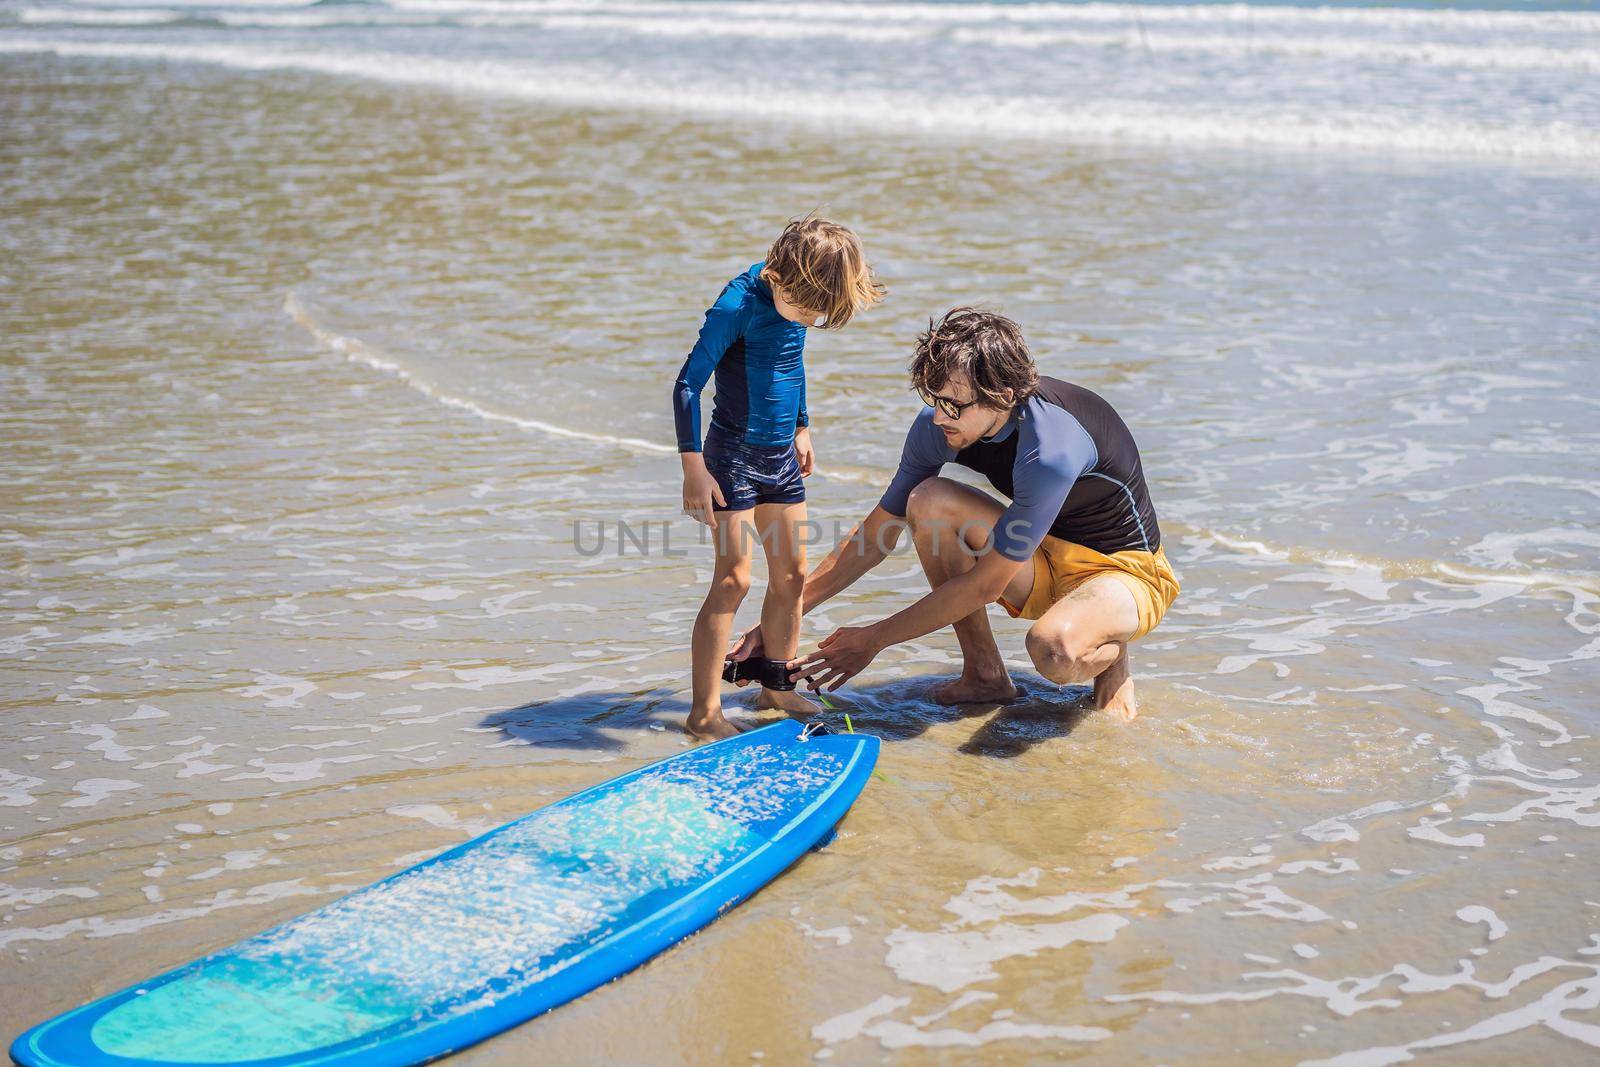 Father or instructor teaching his son how to surf in the sea on vacation or holiday. Travel and sports with children concept. Surfing lesson for kids.